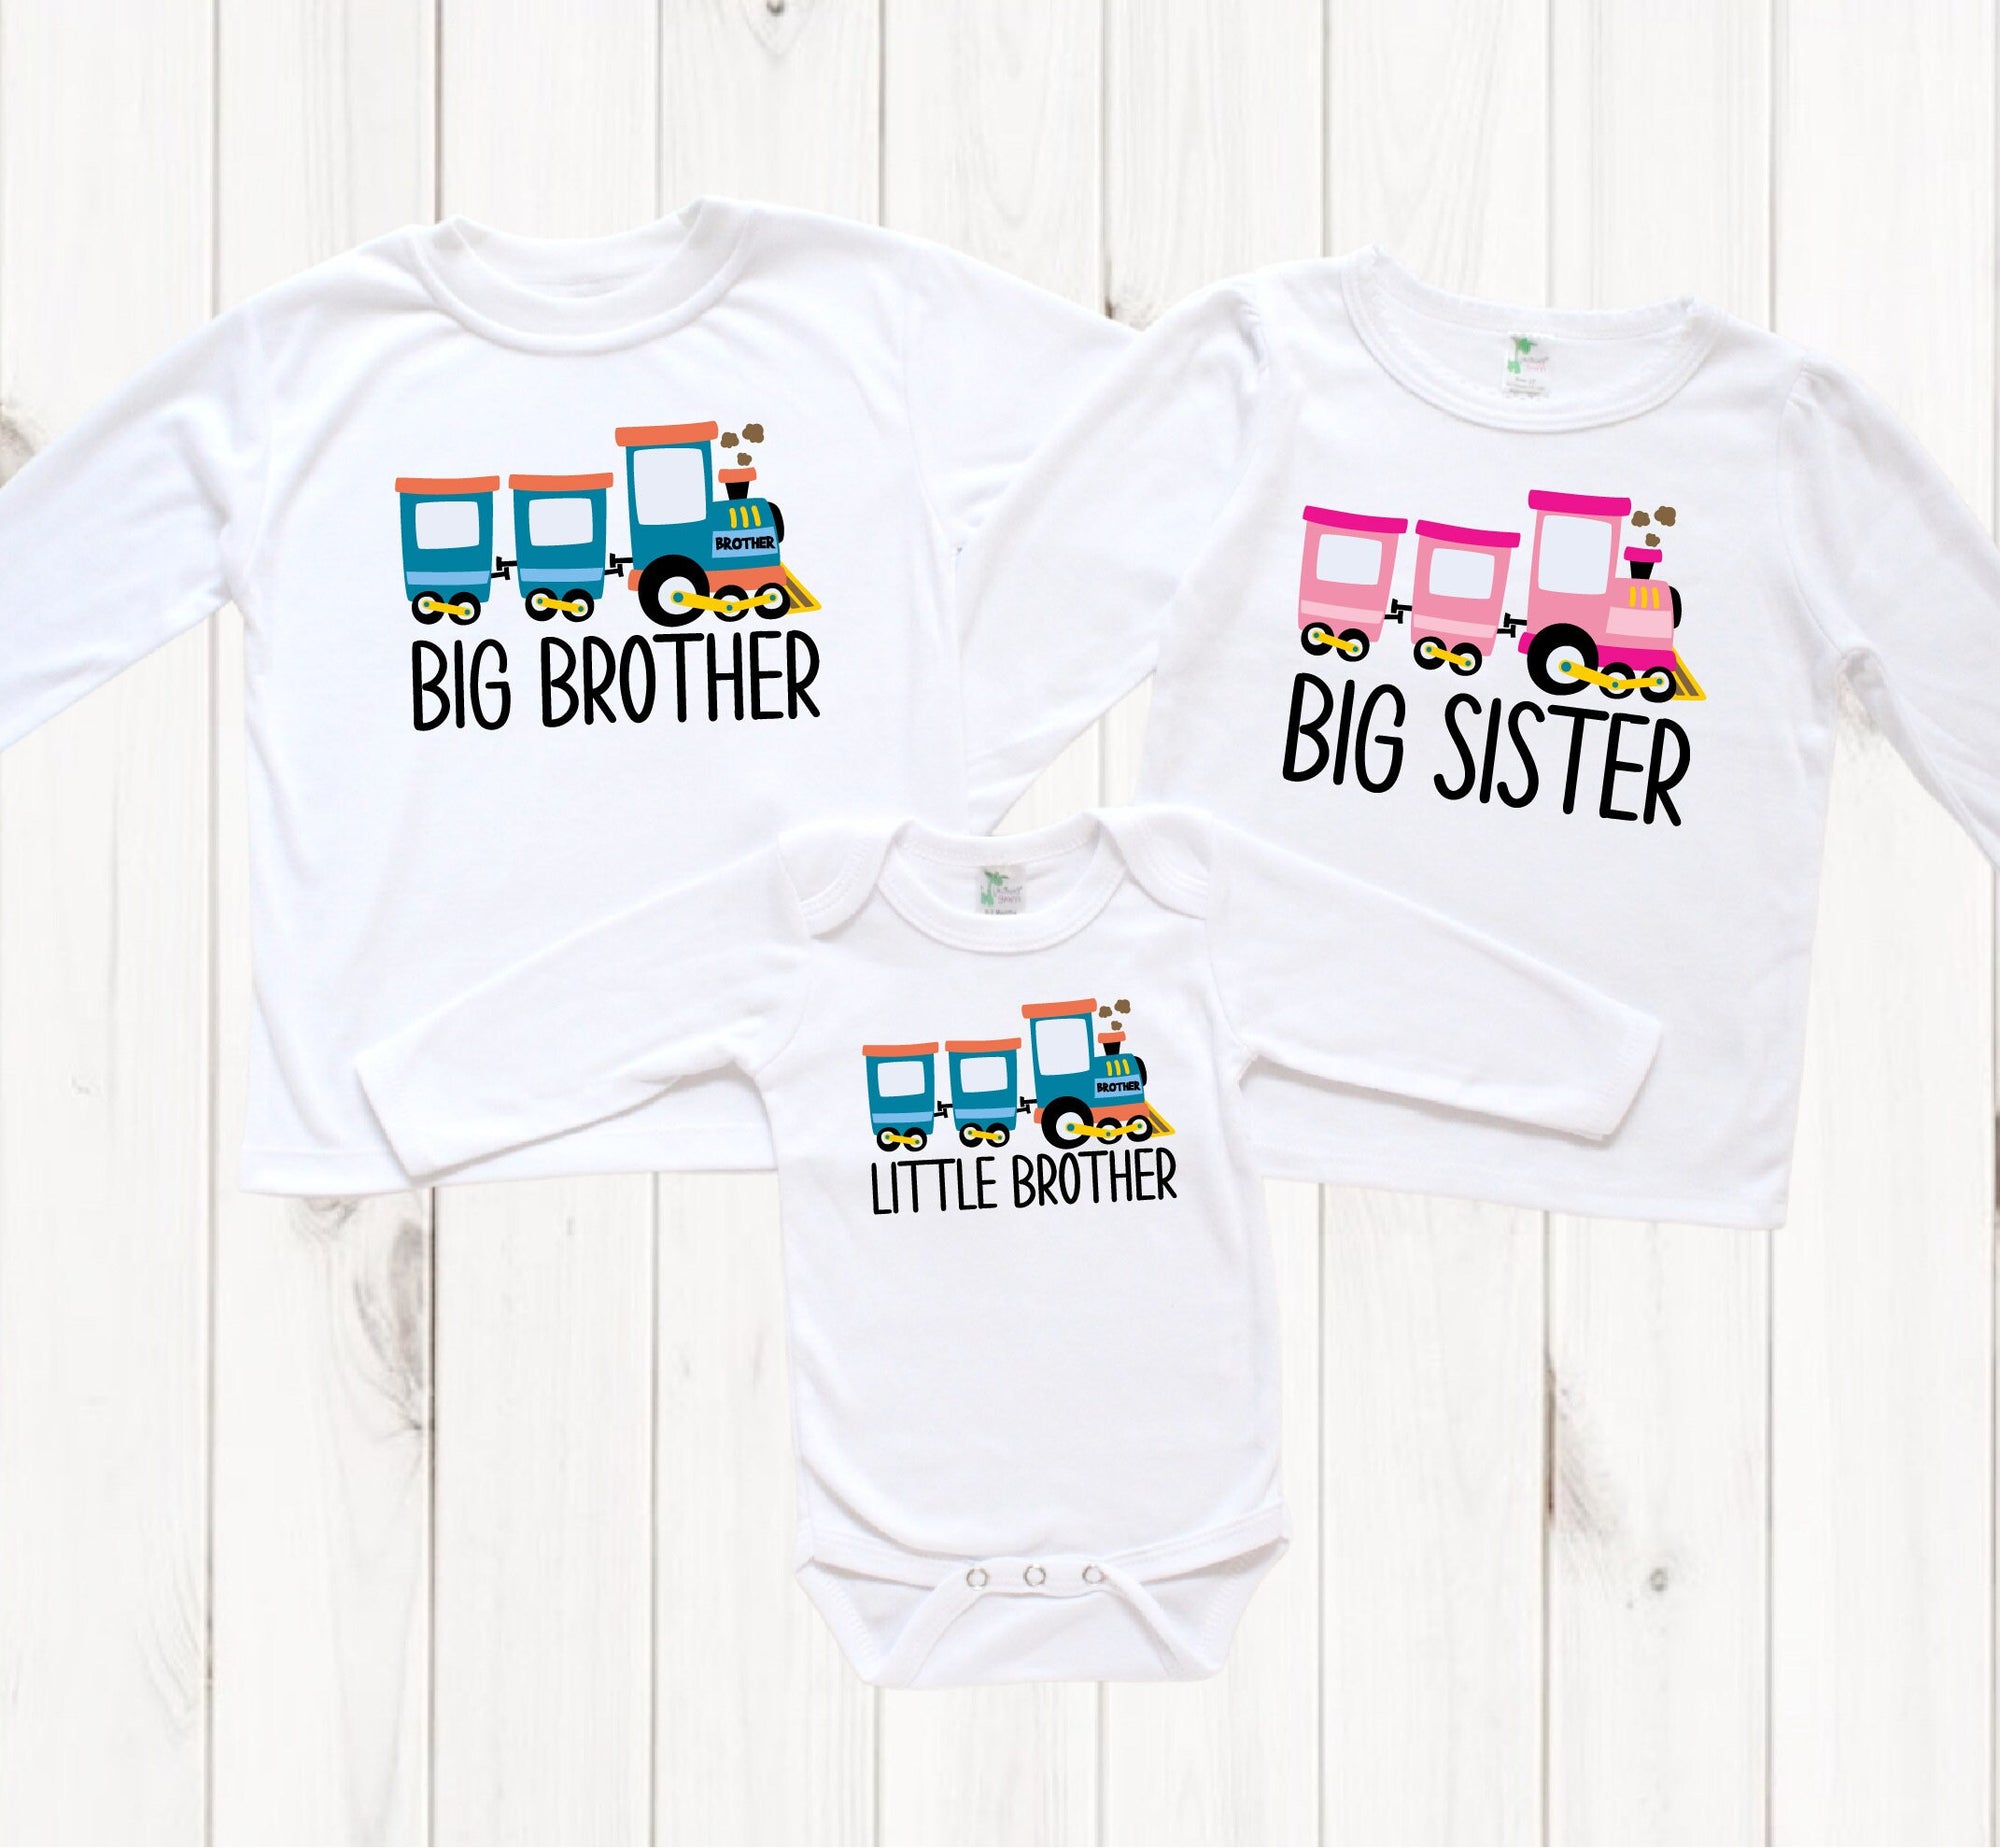 Big Brother Big Sister Little Brother Set, Long Sleeve Big Brother Little Brother Matching Outfits, New Baby, I'm Going To Be A Big Brother